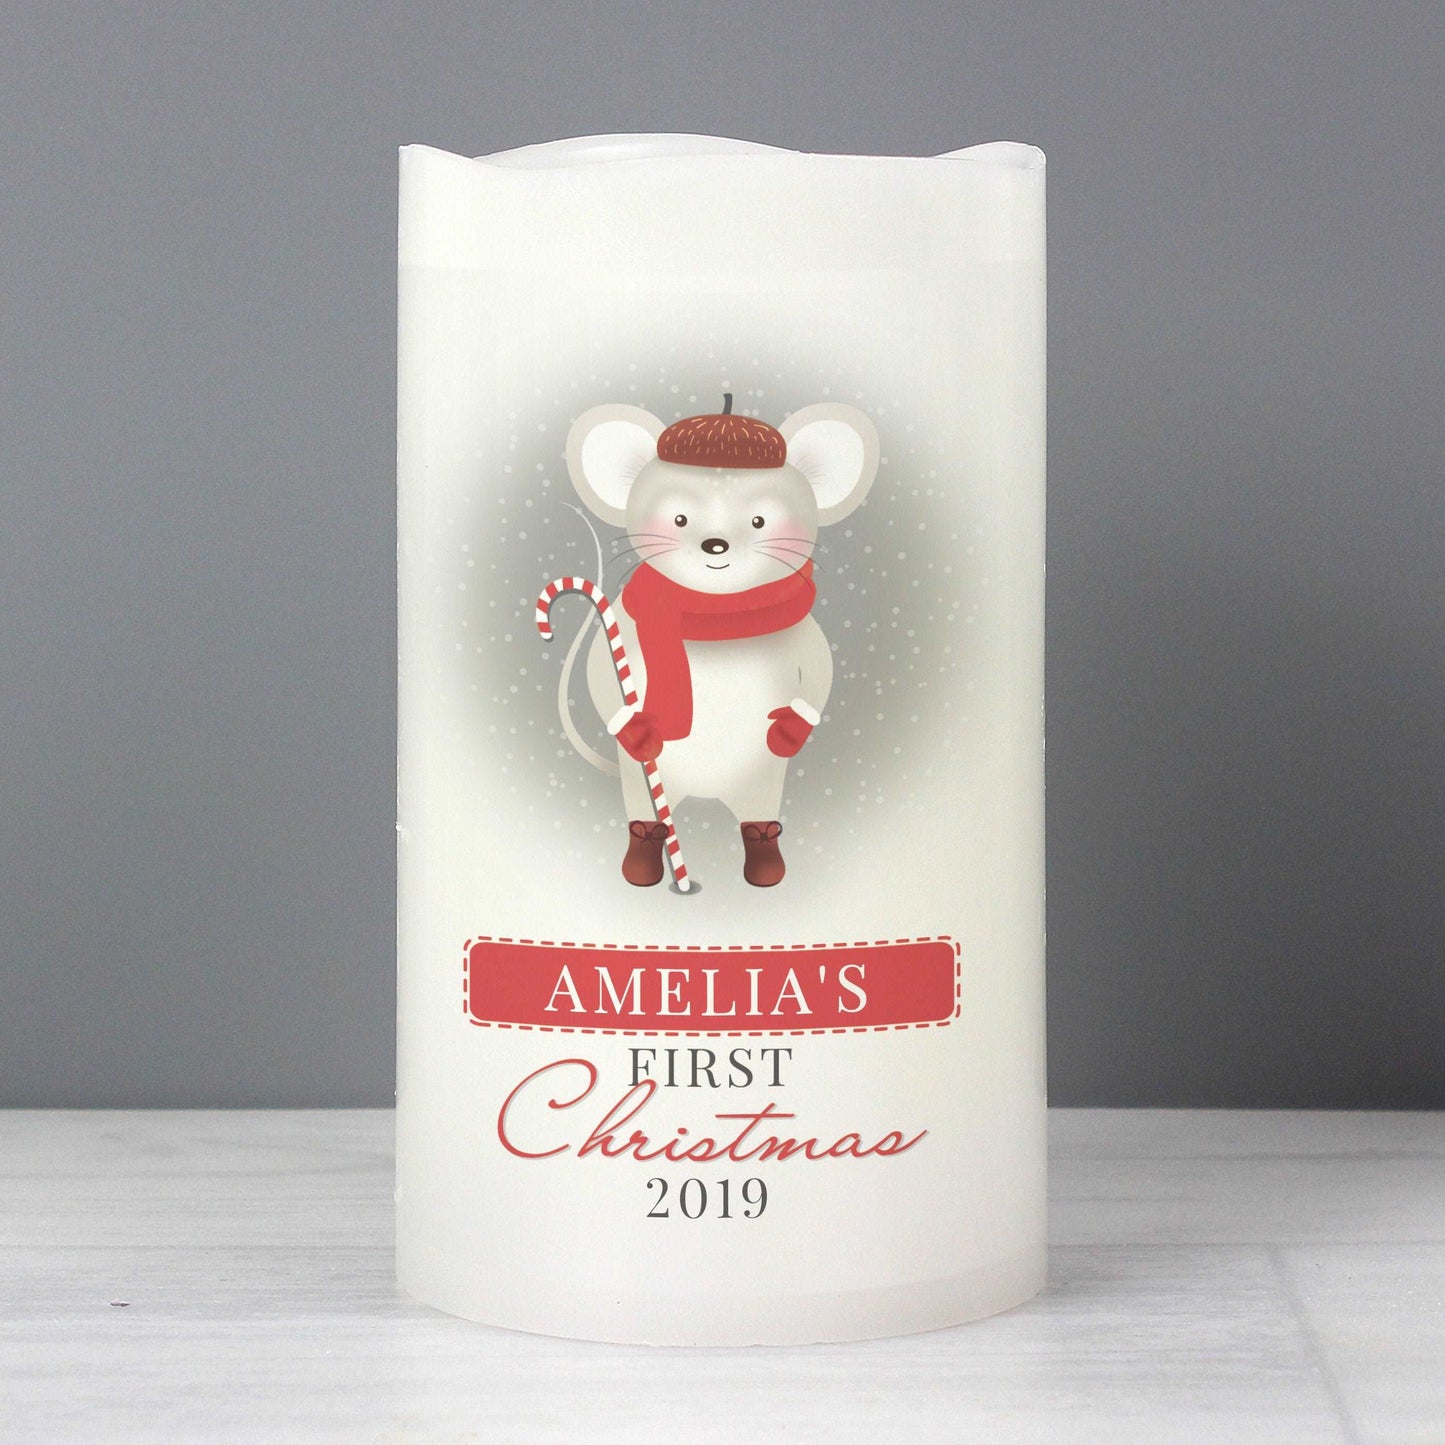 LED Candle with cute Mouse design with First Christmas text personalise with Name and year By Sweetlea Gifts